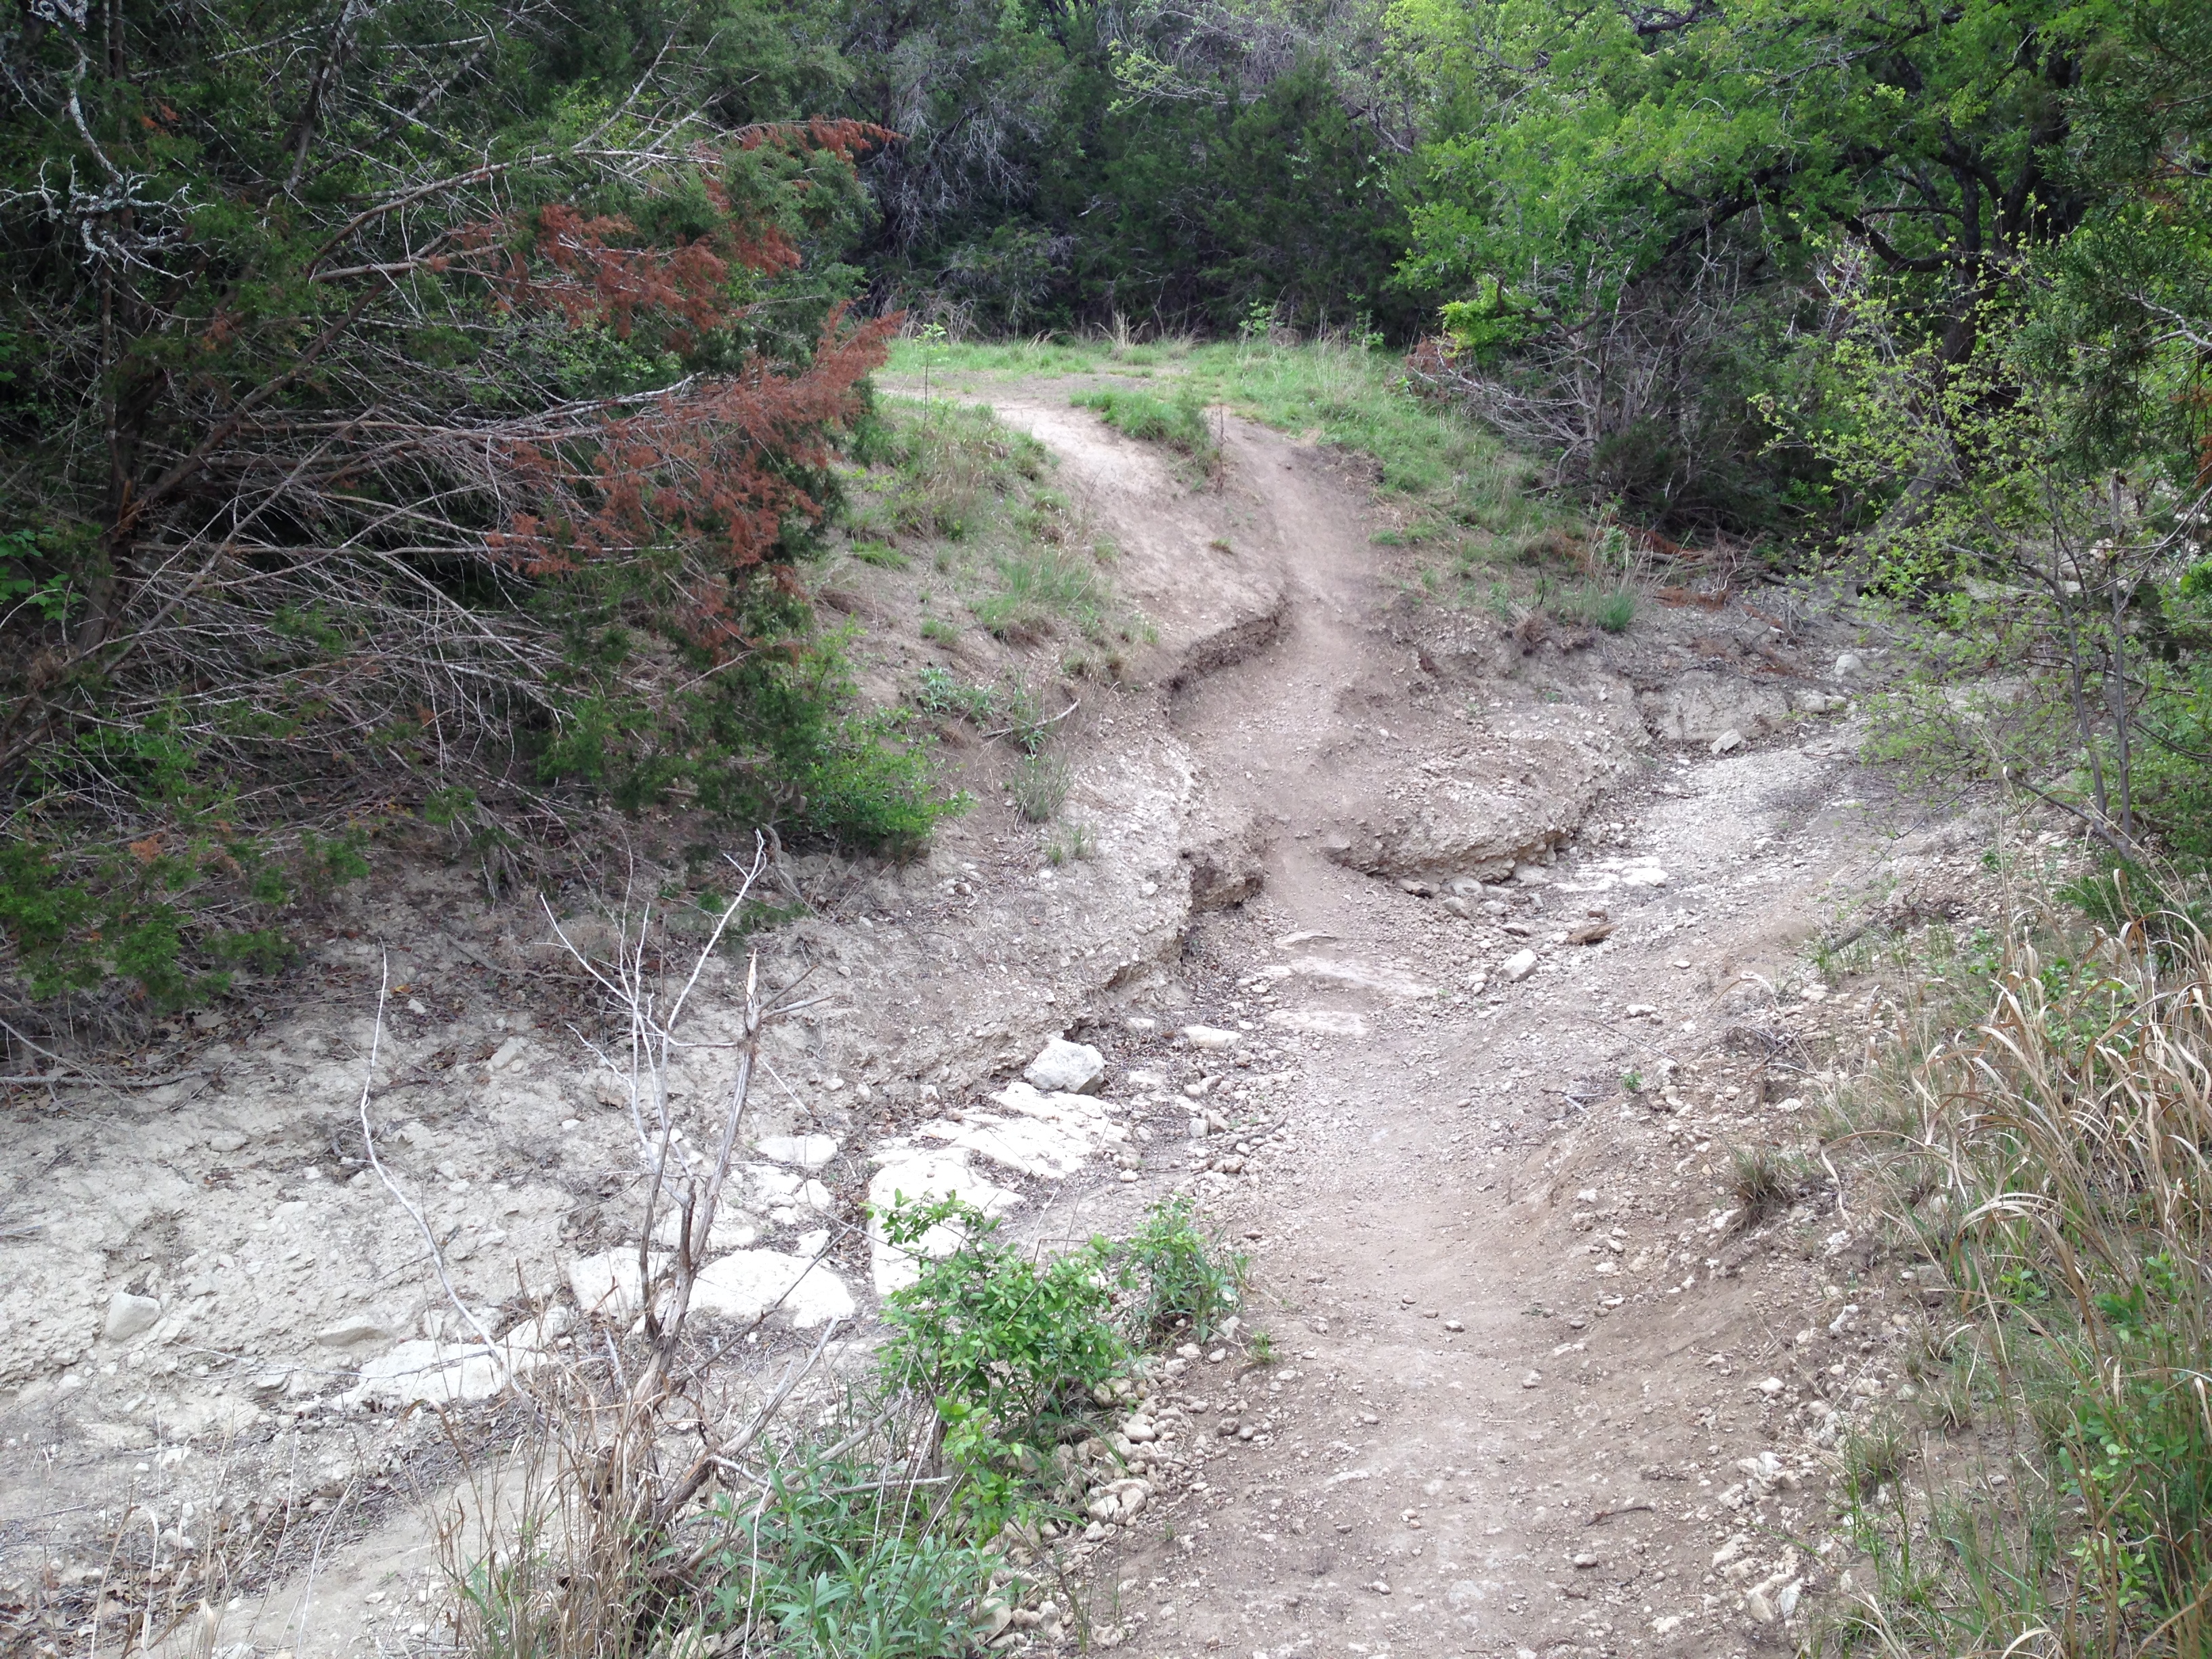 The metropolitan park trail crosses Slaughter Creek with a short, steep, descent. It'll be awhile before I can ride it.